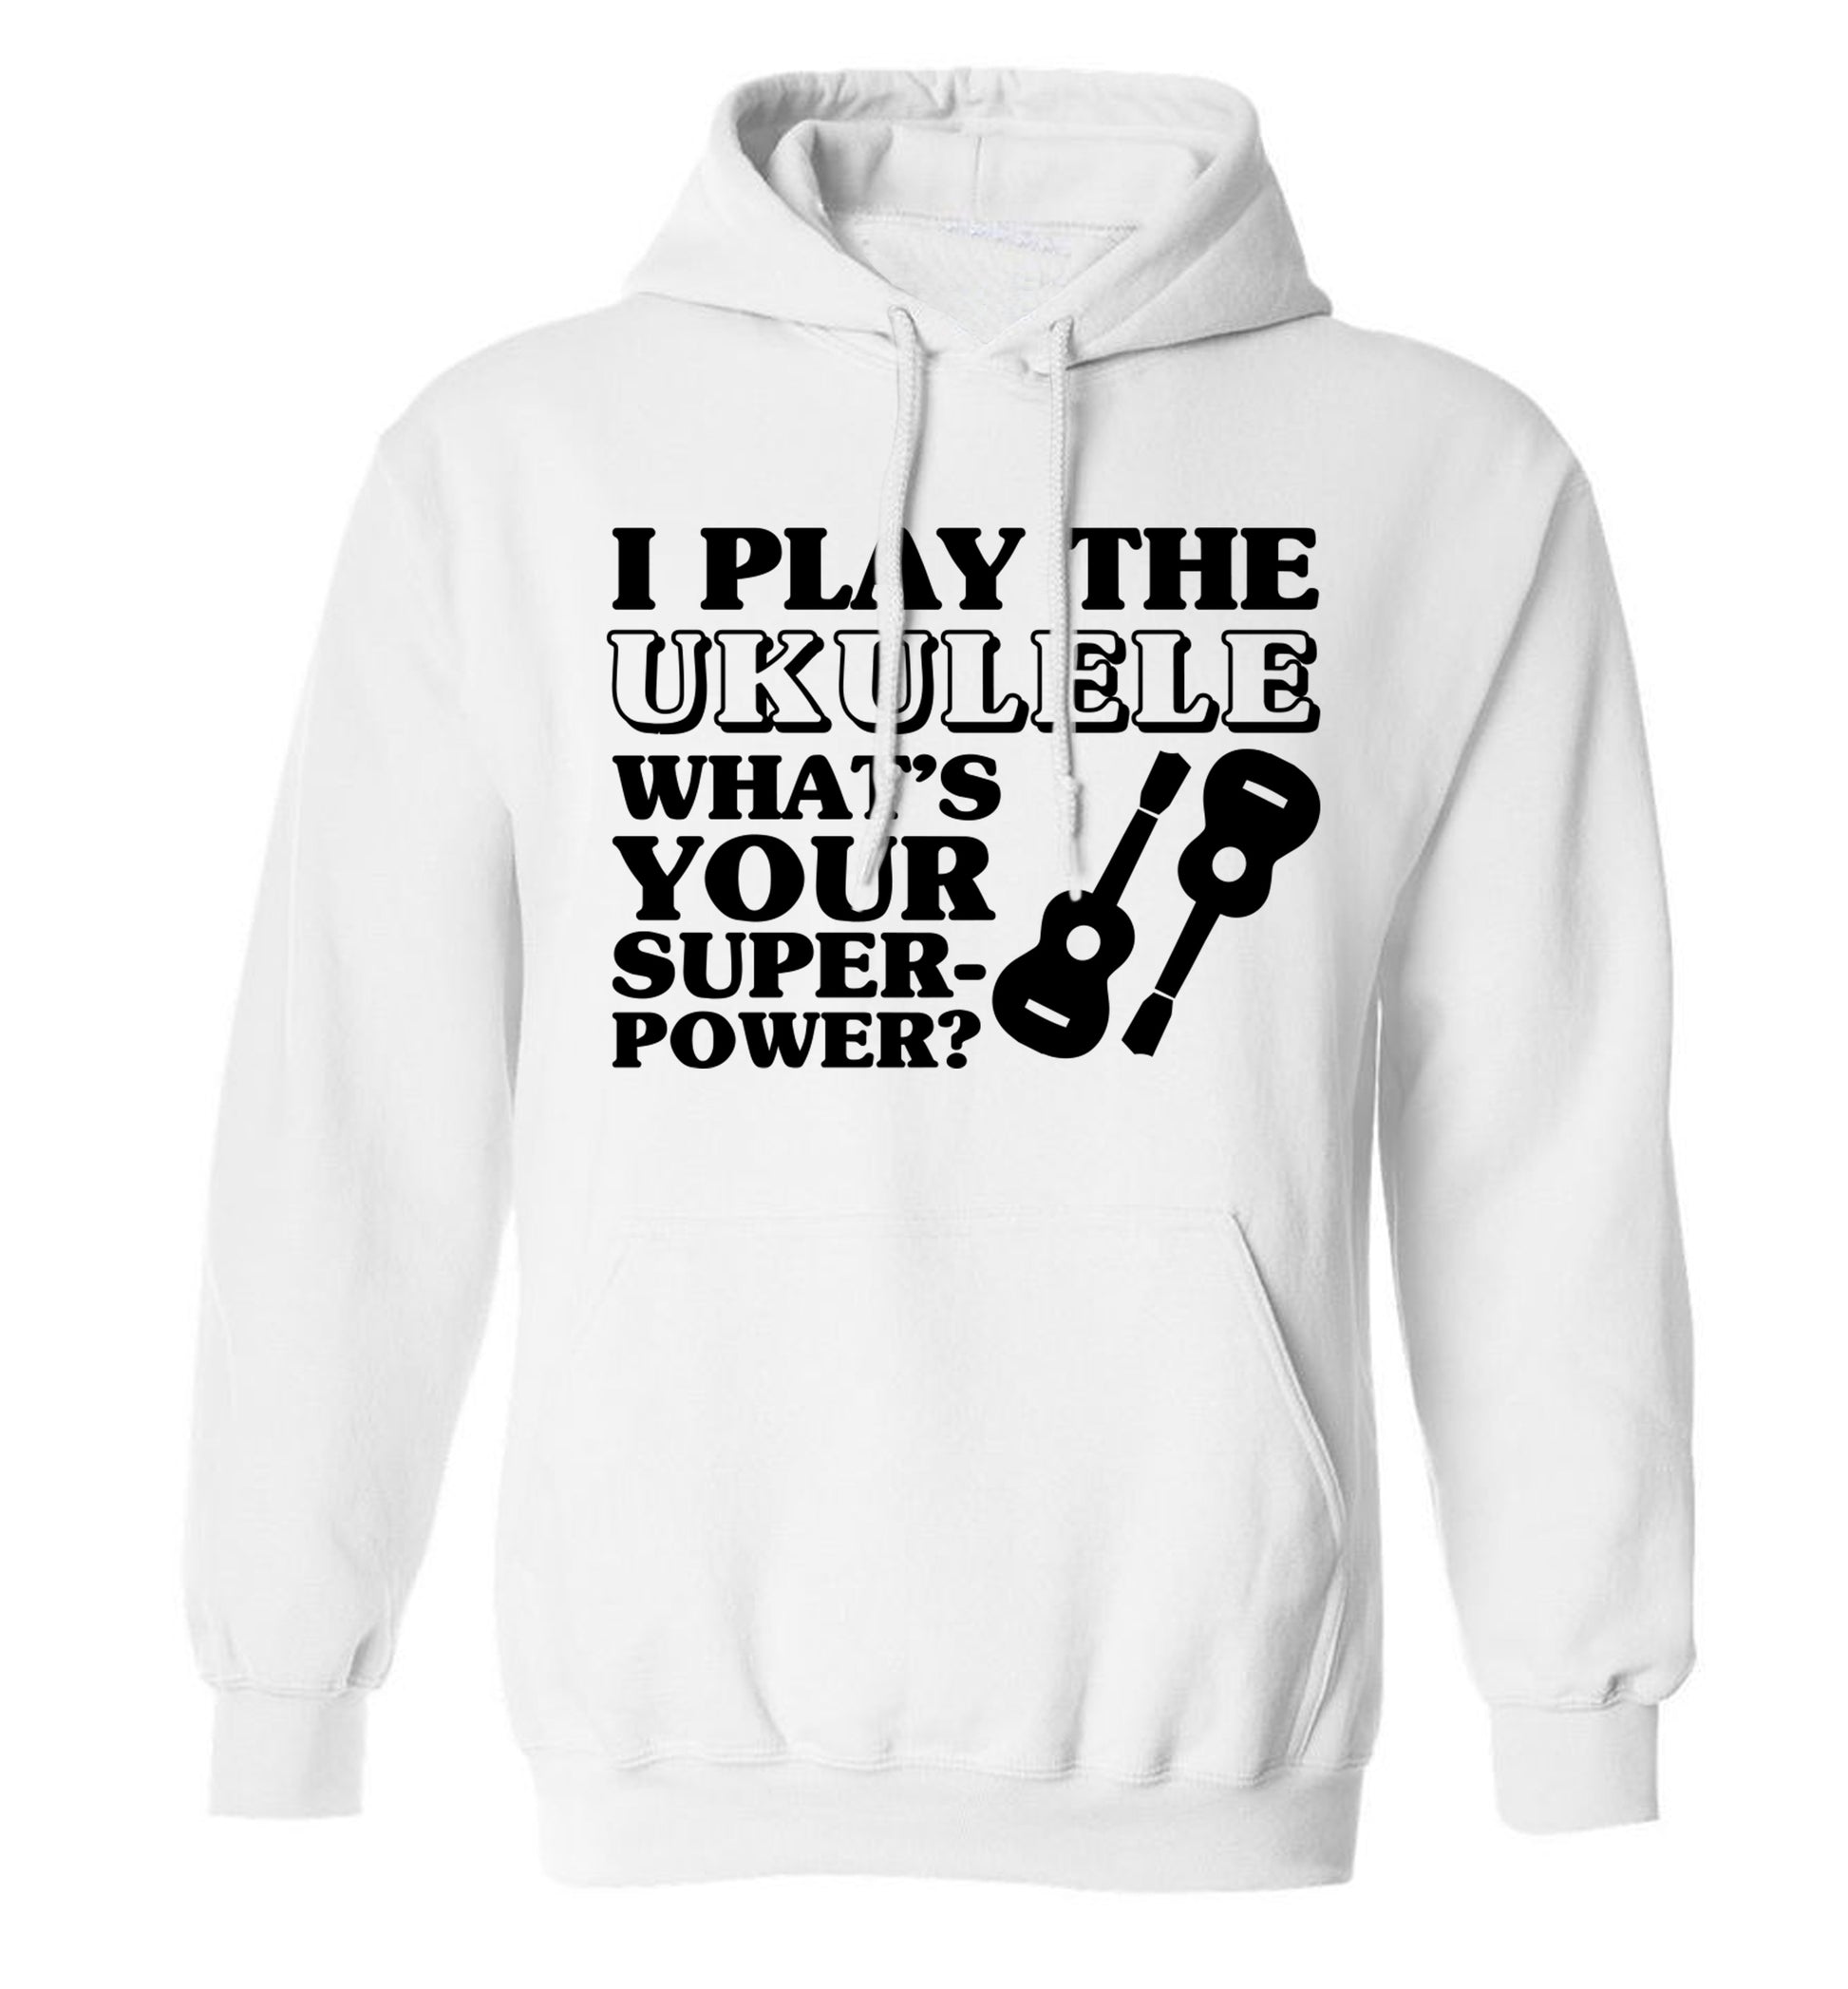 I play the ukulele what's your superpower? adults unisex white hoodie 2XL